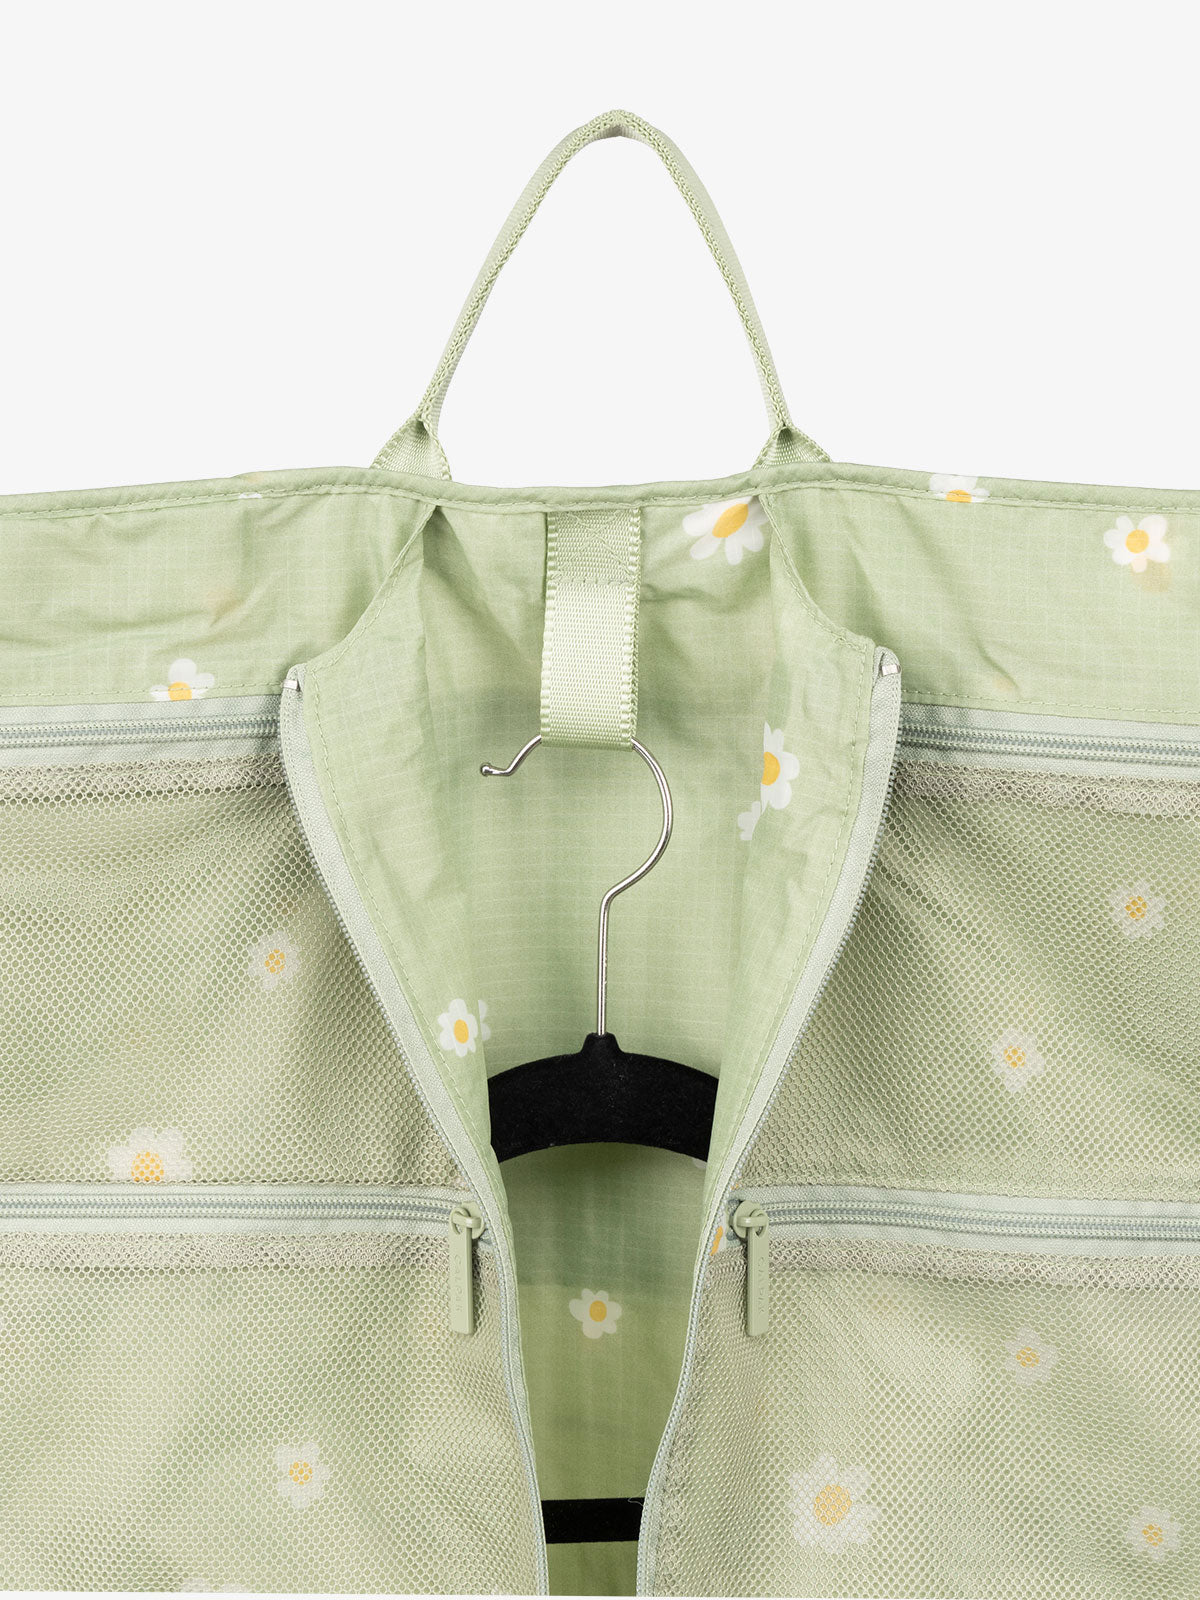 CALPAK Compakt large hanging garment travel bag with handle and mesh pockets in daisy